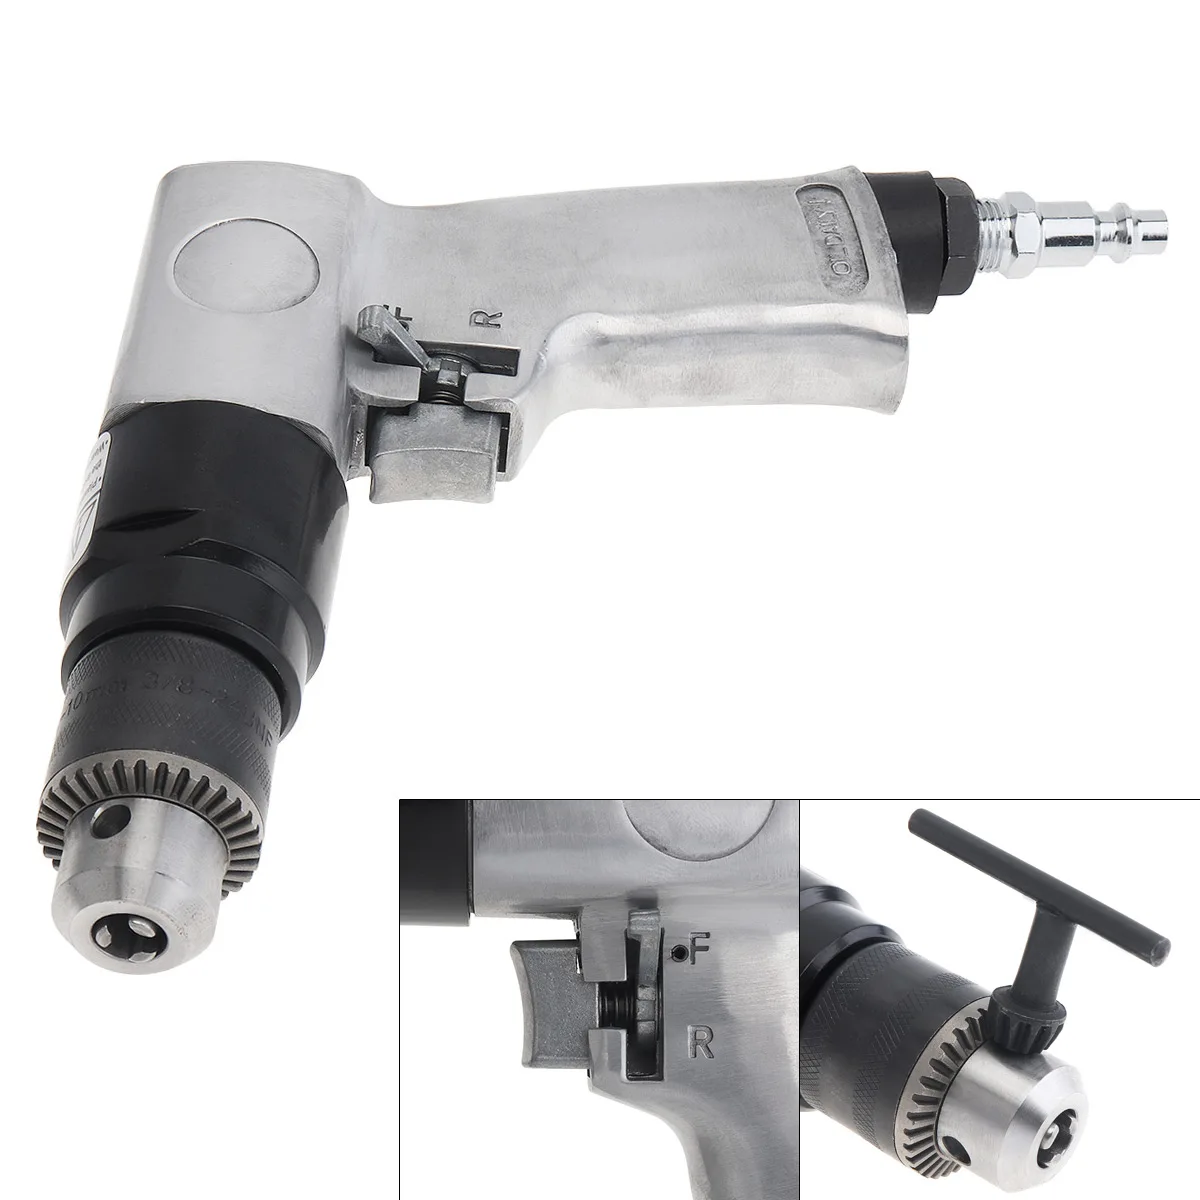 

1/4" 1700rpm High-speed Positive Reversal Pistol-type Pneumatic Gun Drill with Chuck Wrench and Connector for Hole Drilling